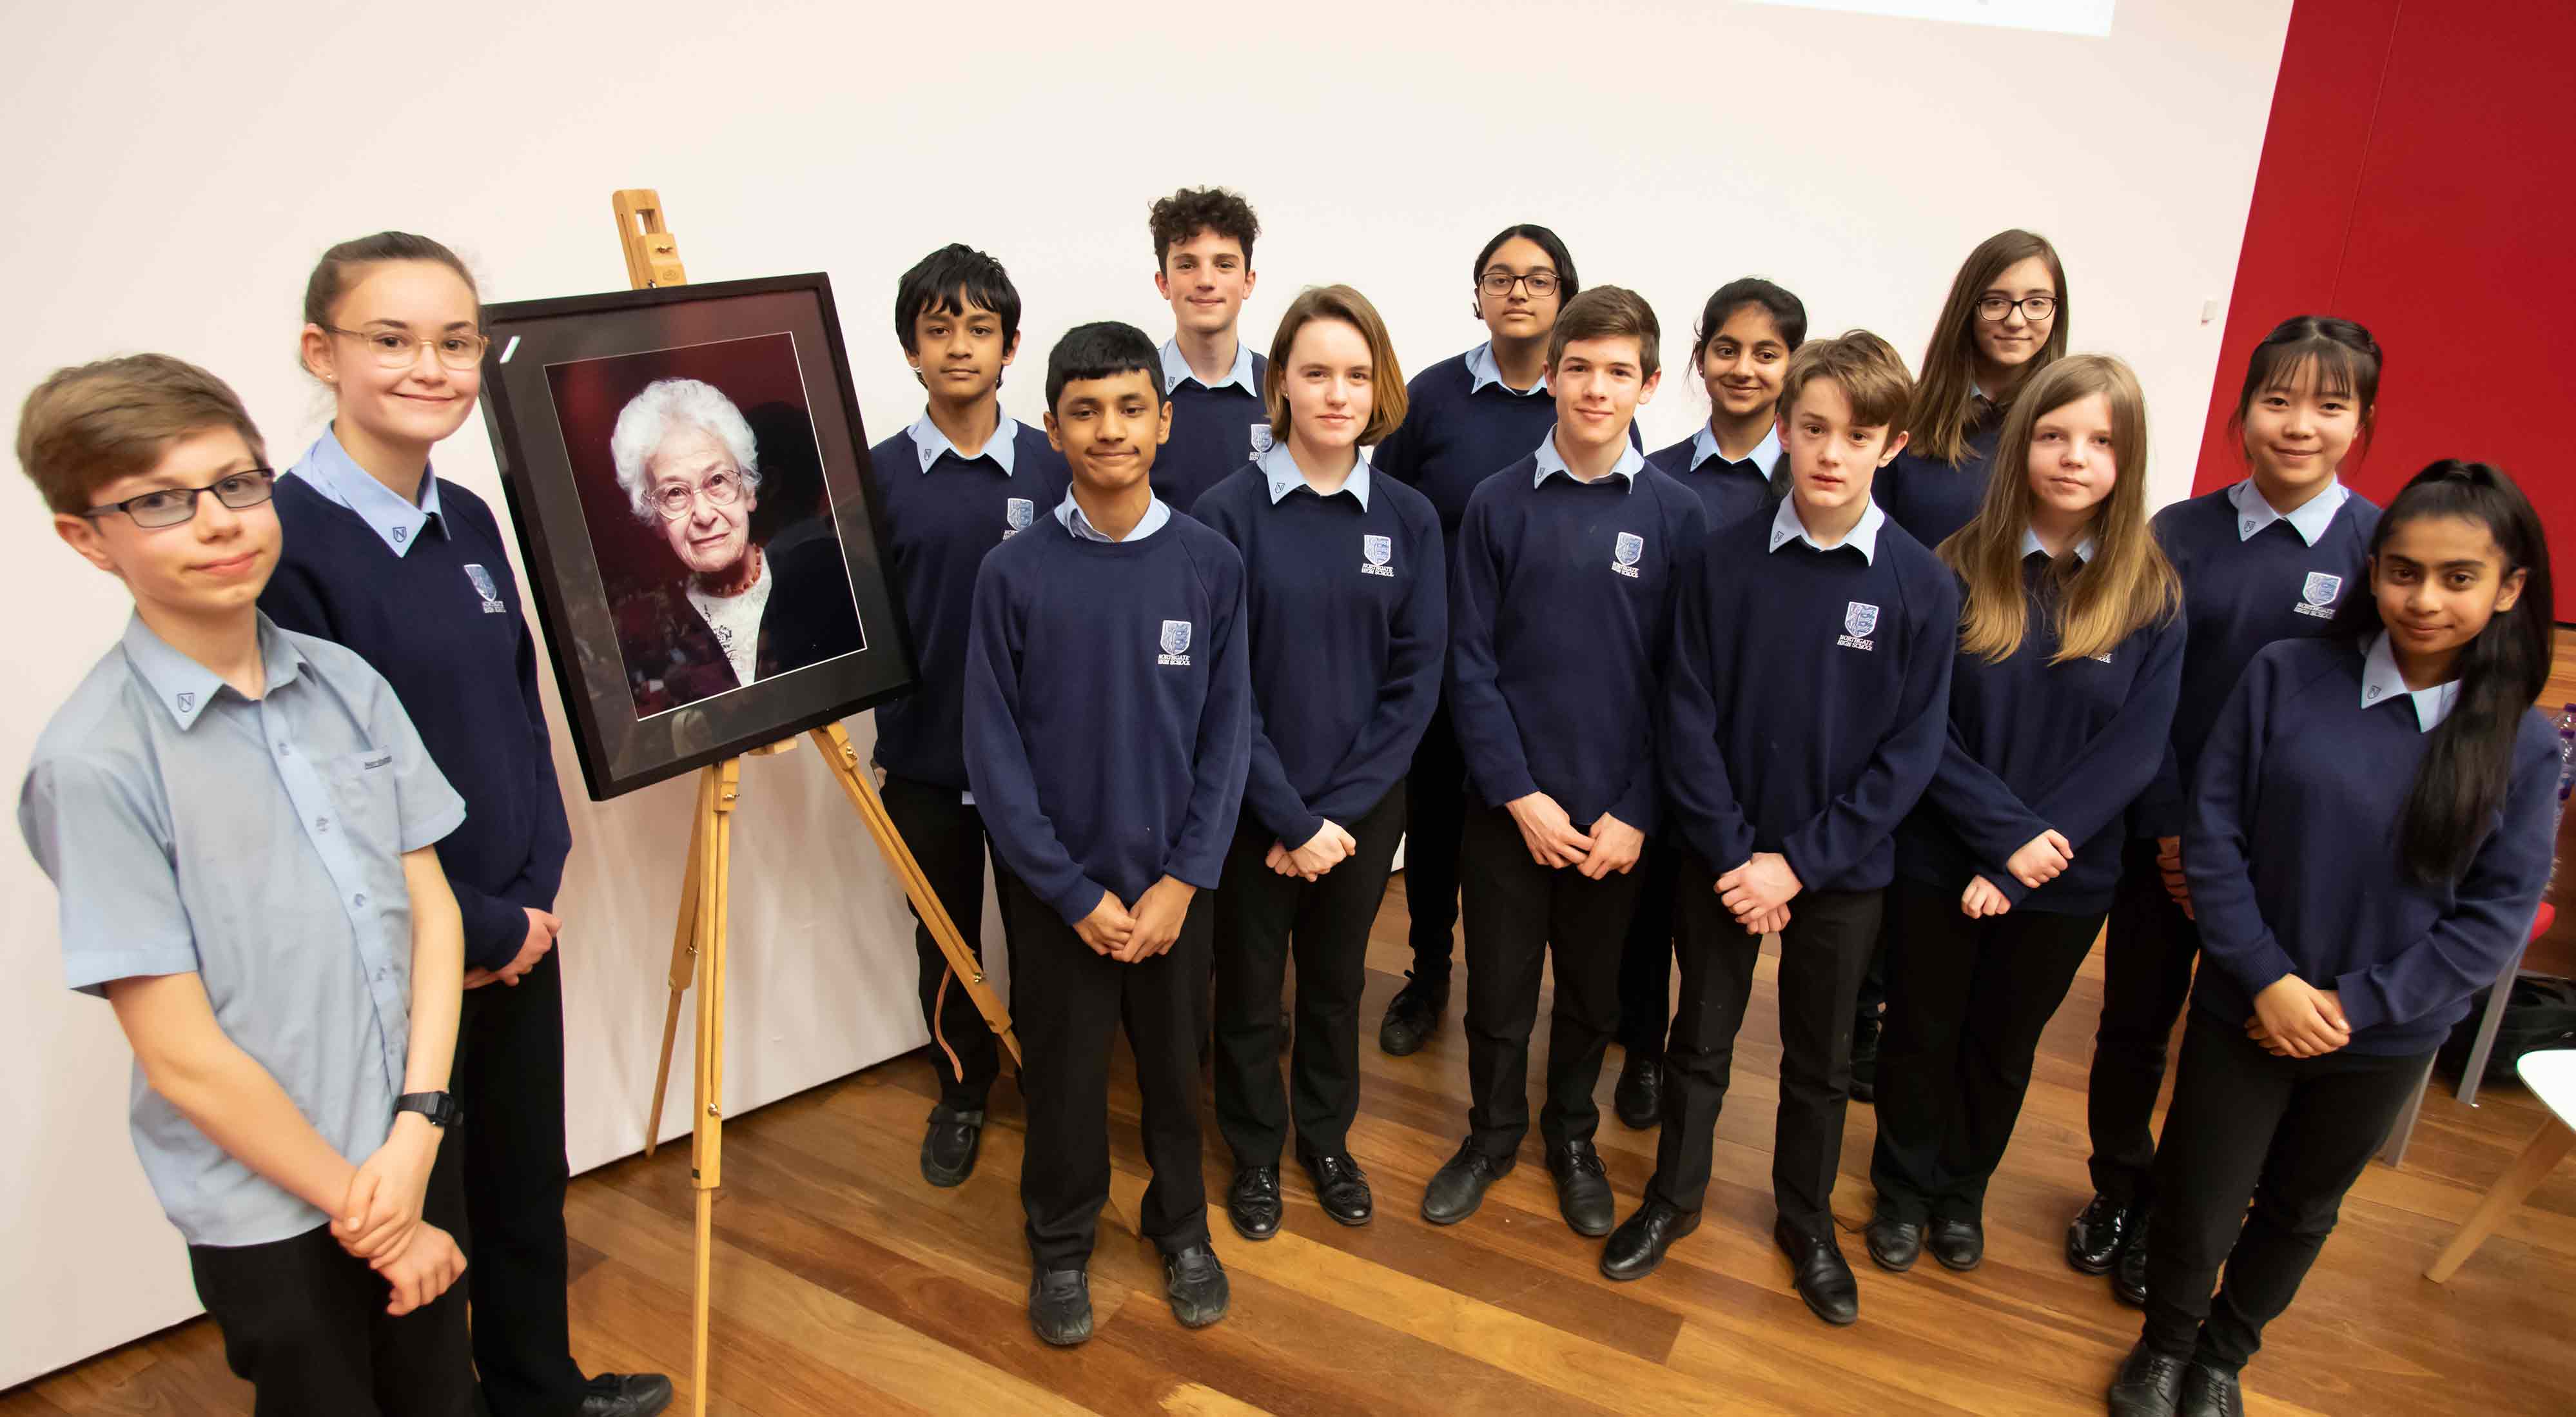 A group of young children, smiling and looking relaxed, stand around the portrait of Holocaust survivor Dora Love which is resting on an easel